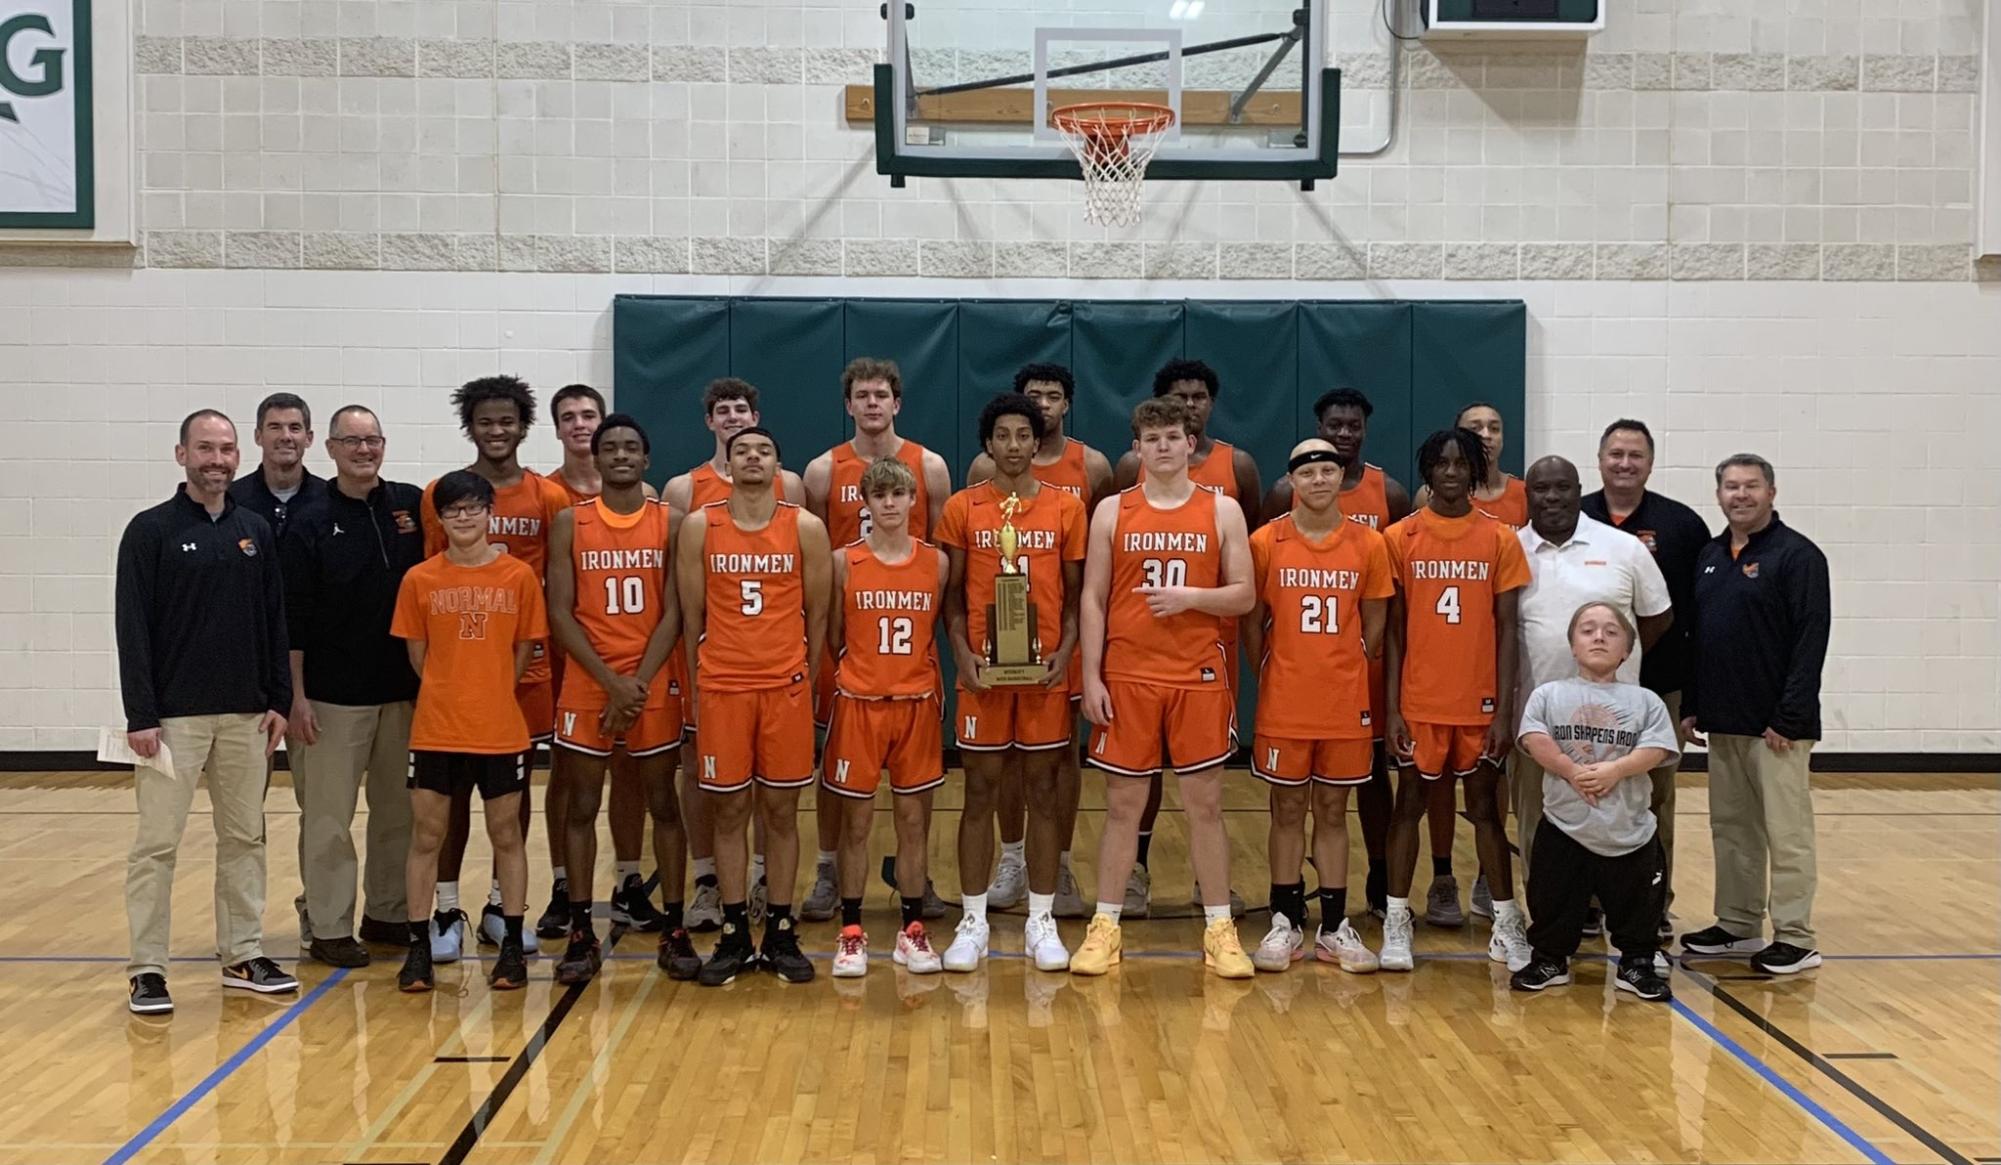 The Ironmen won the Intercity title, going undefeated in the annual tournament to kickoff the 2023-24 season.
Intercity, head coach Mr. Dave Witzig said, is not an easy way to go into your season. You show up and theres 2000 fans. Its a good experience for our guys to handle it right off the bat.